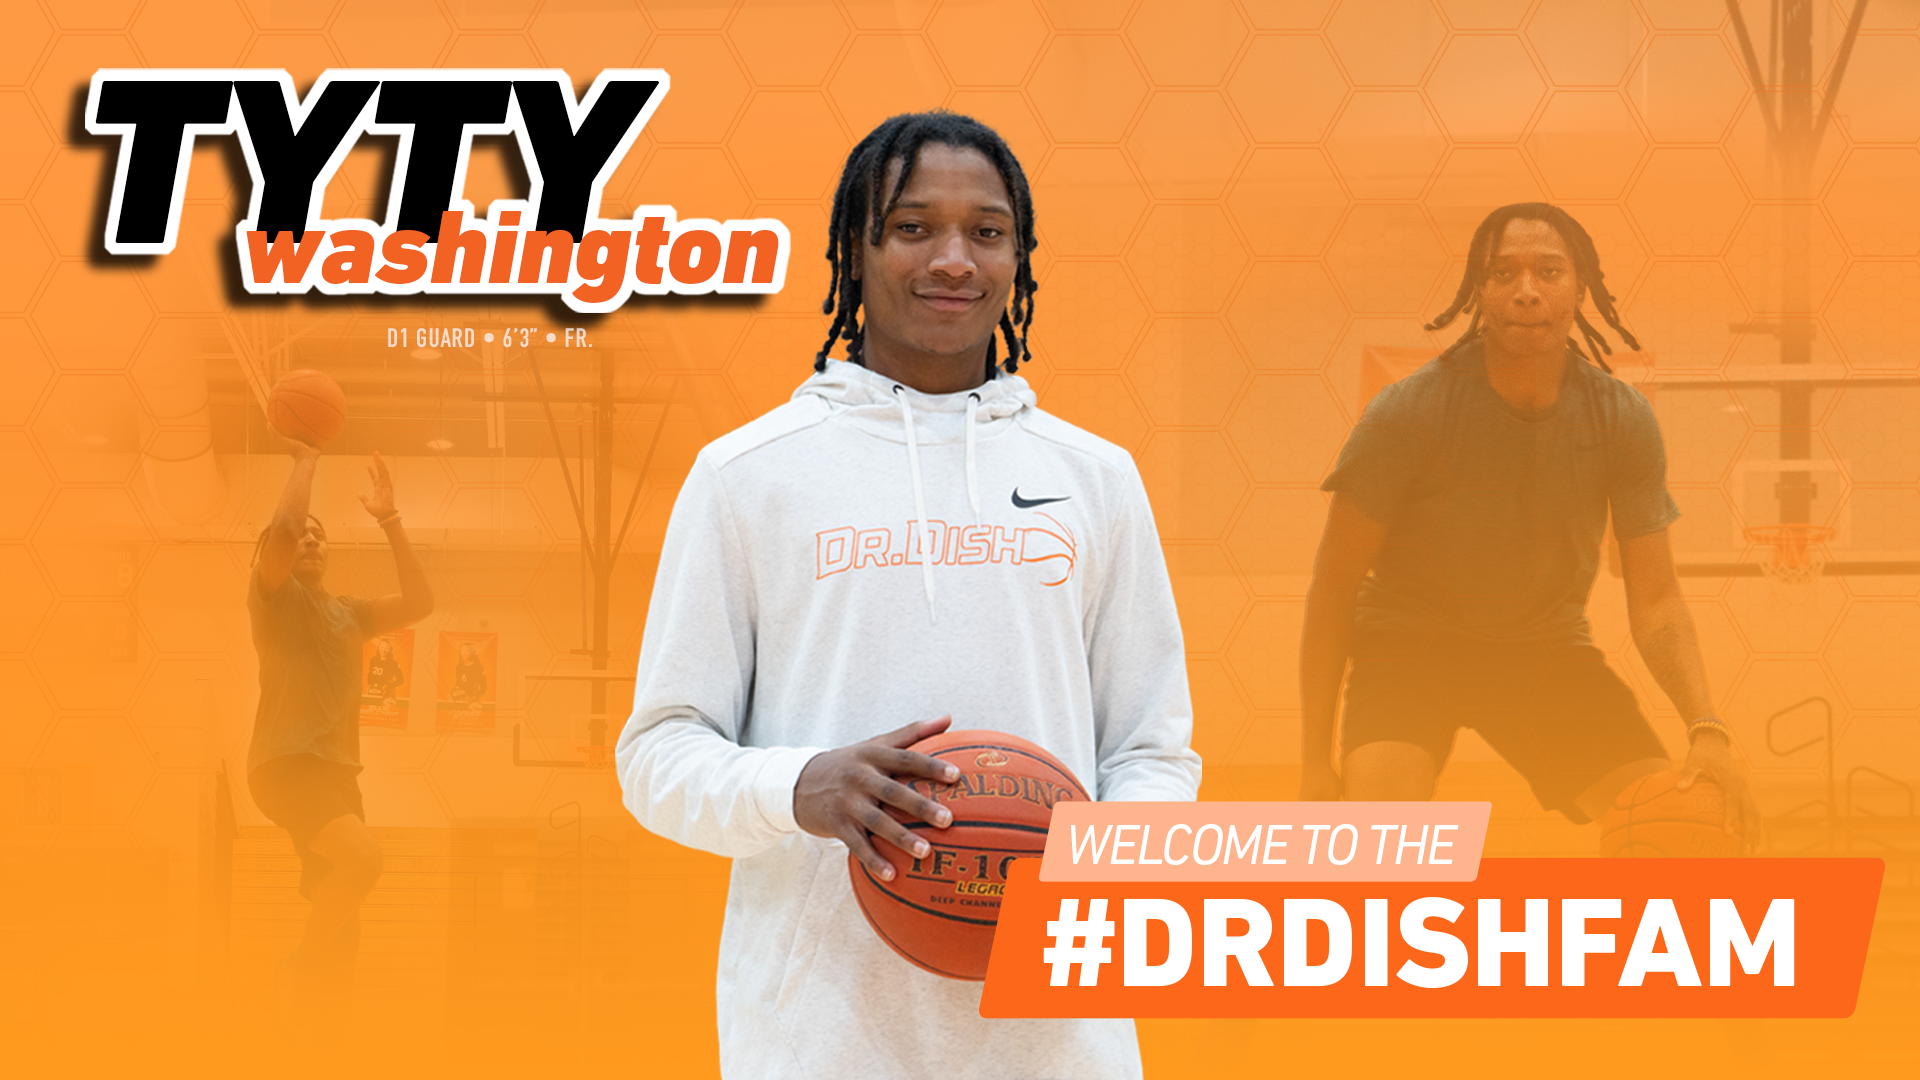 Dr. Dish Partners with Top College Athlete: D1 Point Guard TyTy Washington